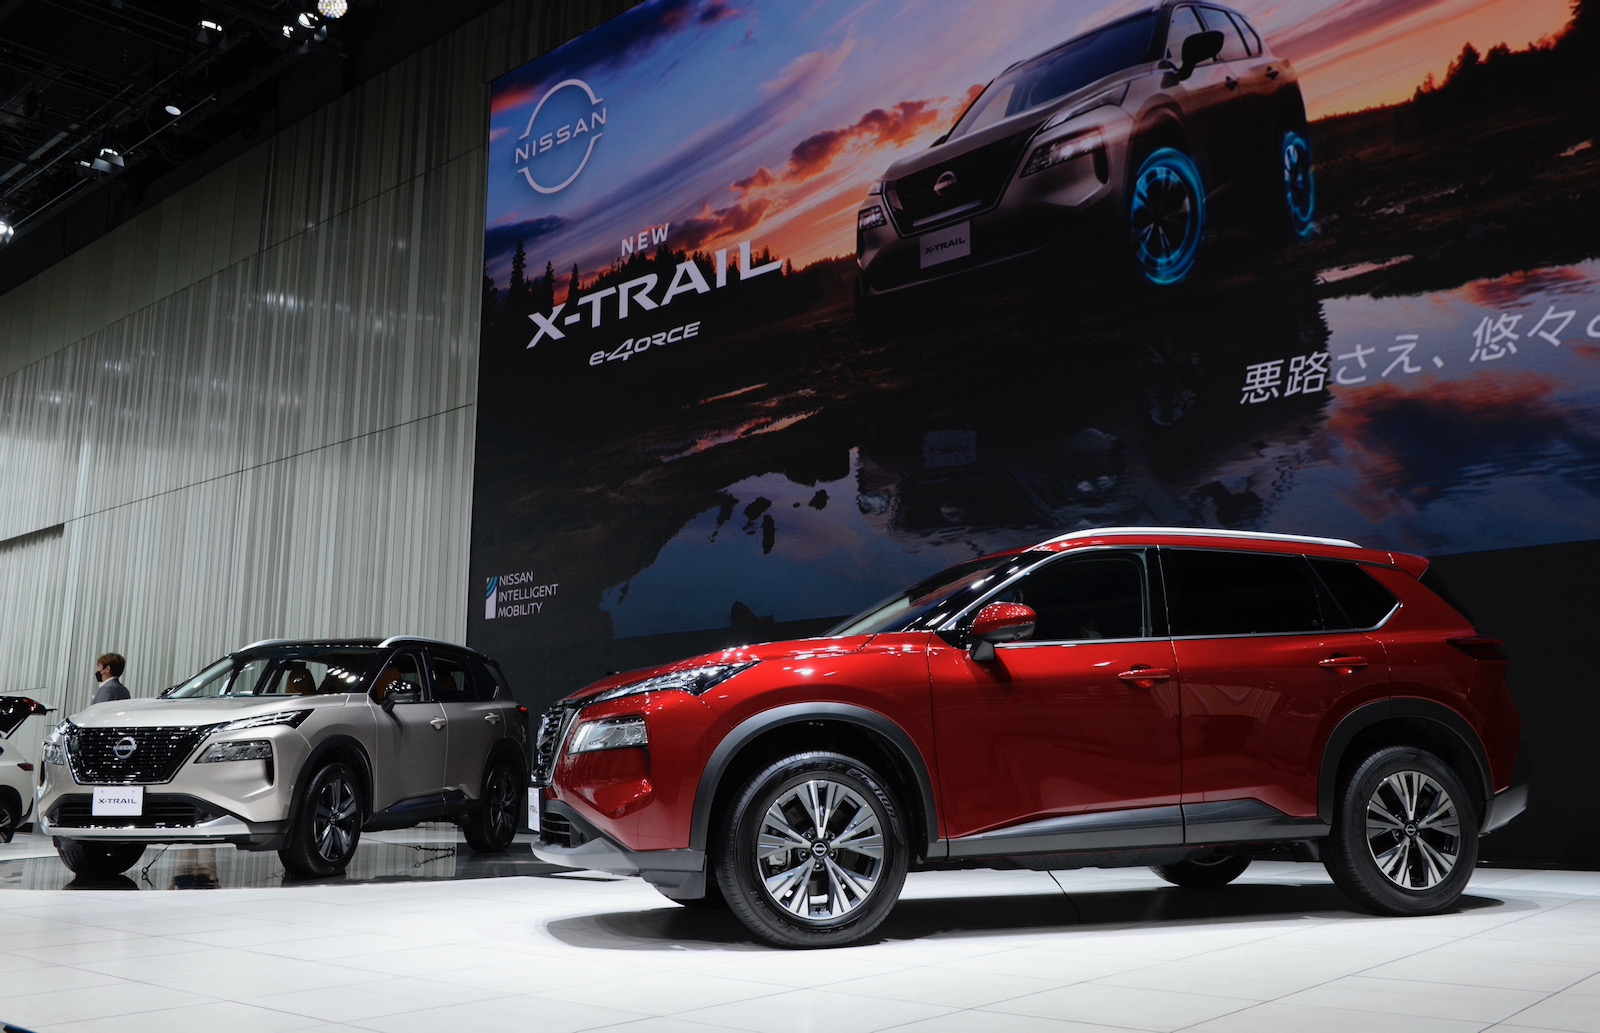 Fully electric Nissan X-Trail, Juke & Qashqai arriving from 2025 – report